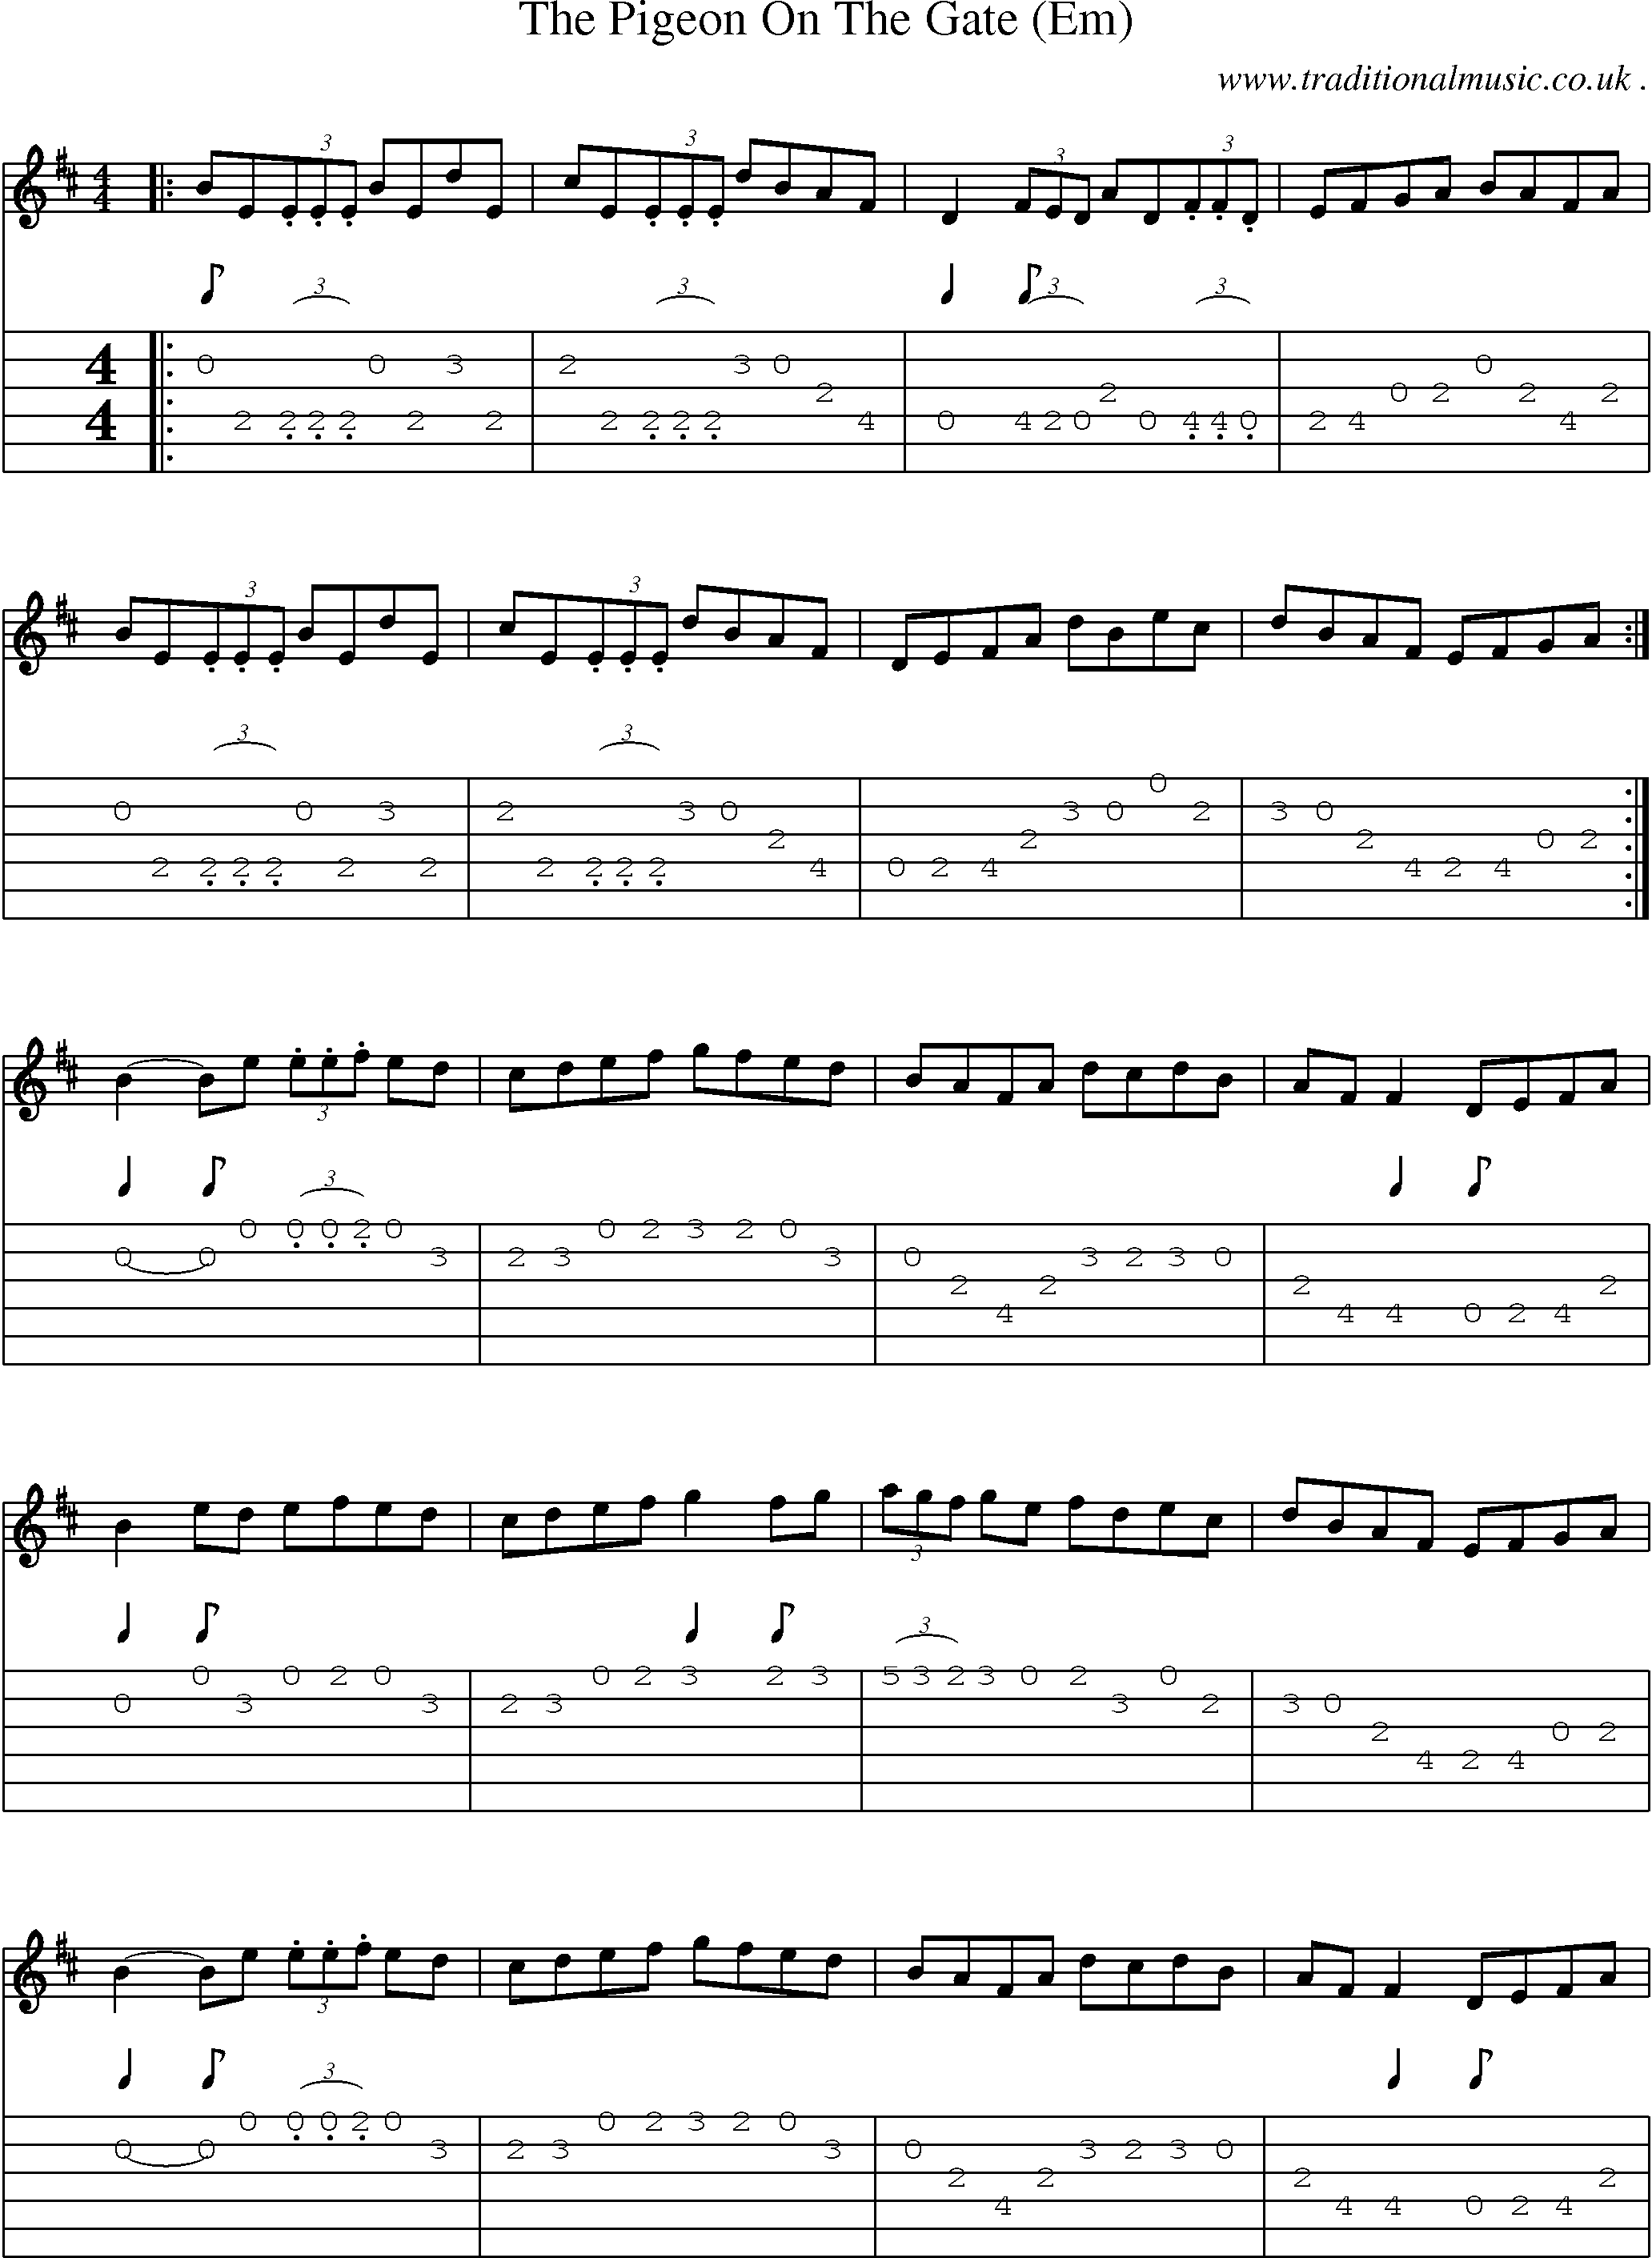 Sheet-Music and Guitar Tabs for The Pigeon On The Gate (em)